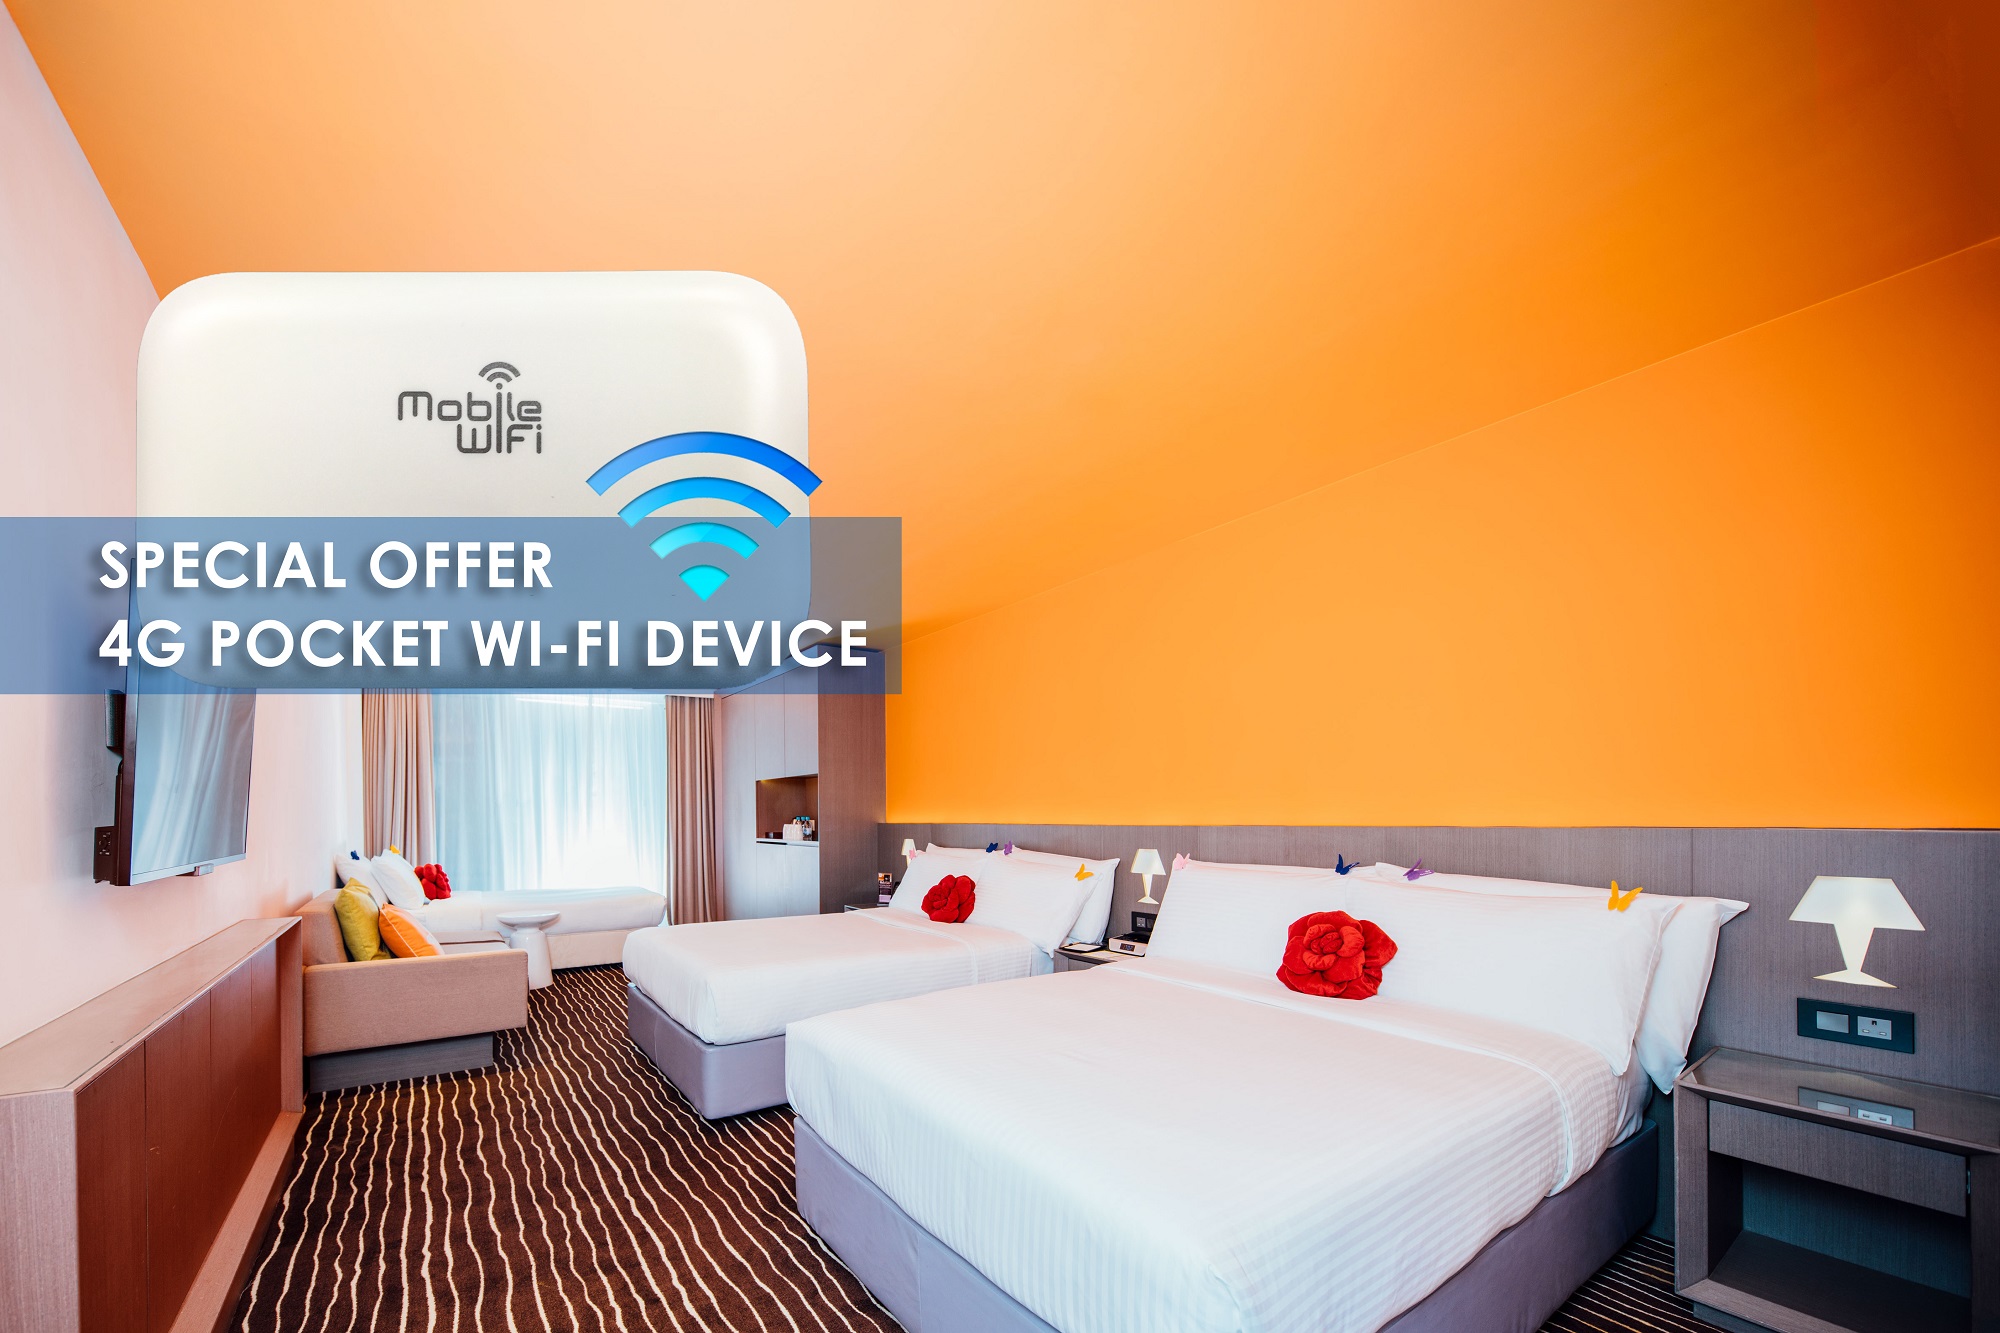 Family Room with 4G Pocket WiFi Device